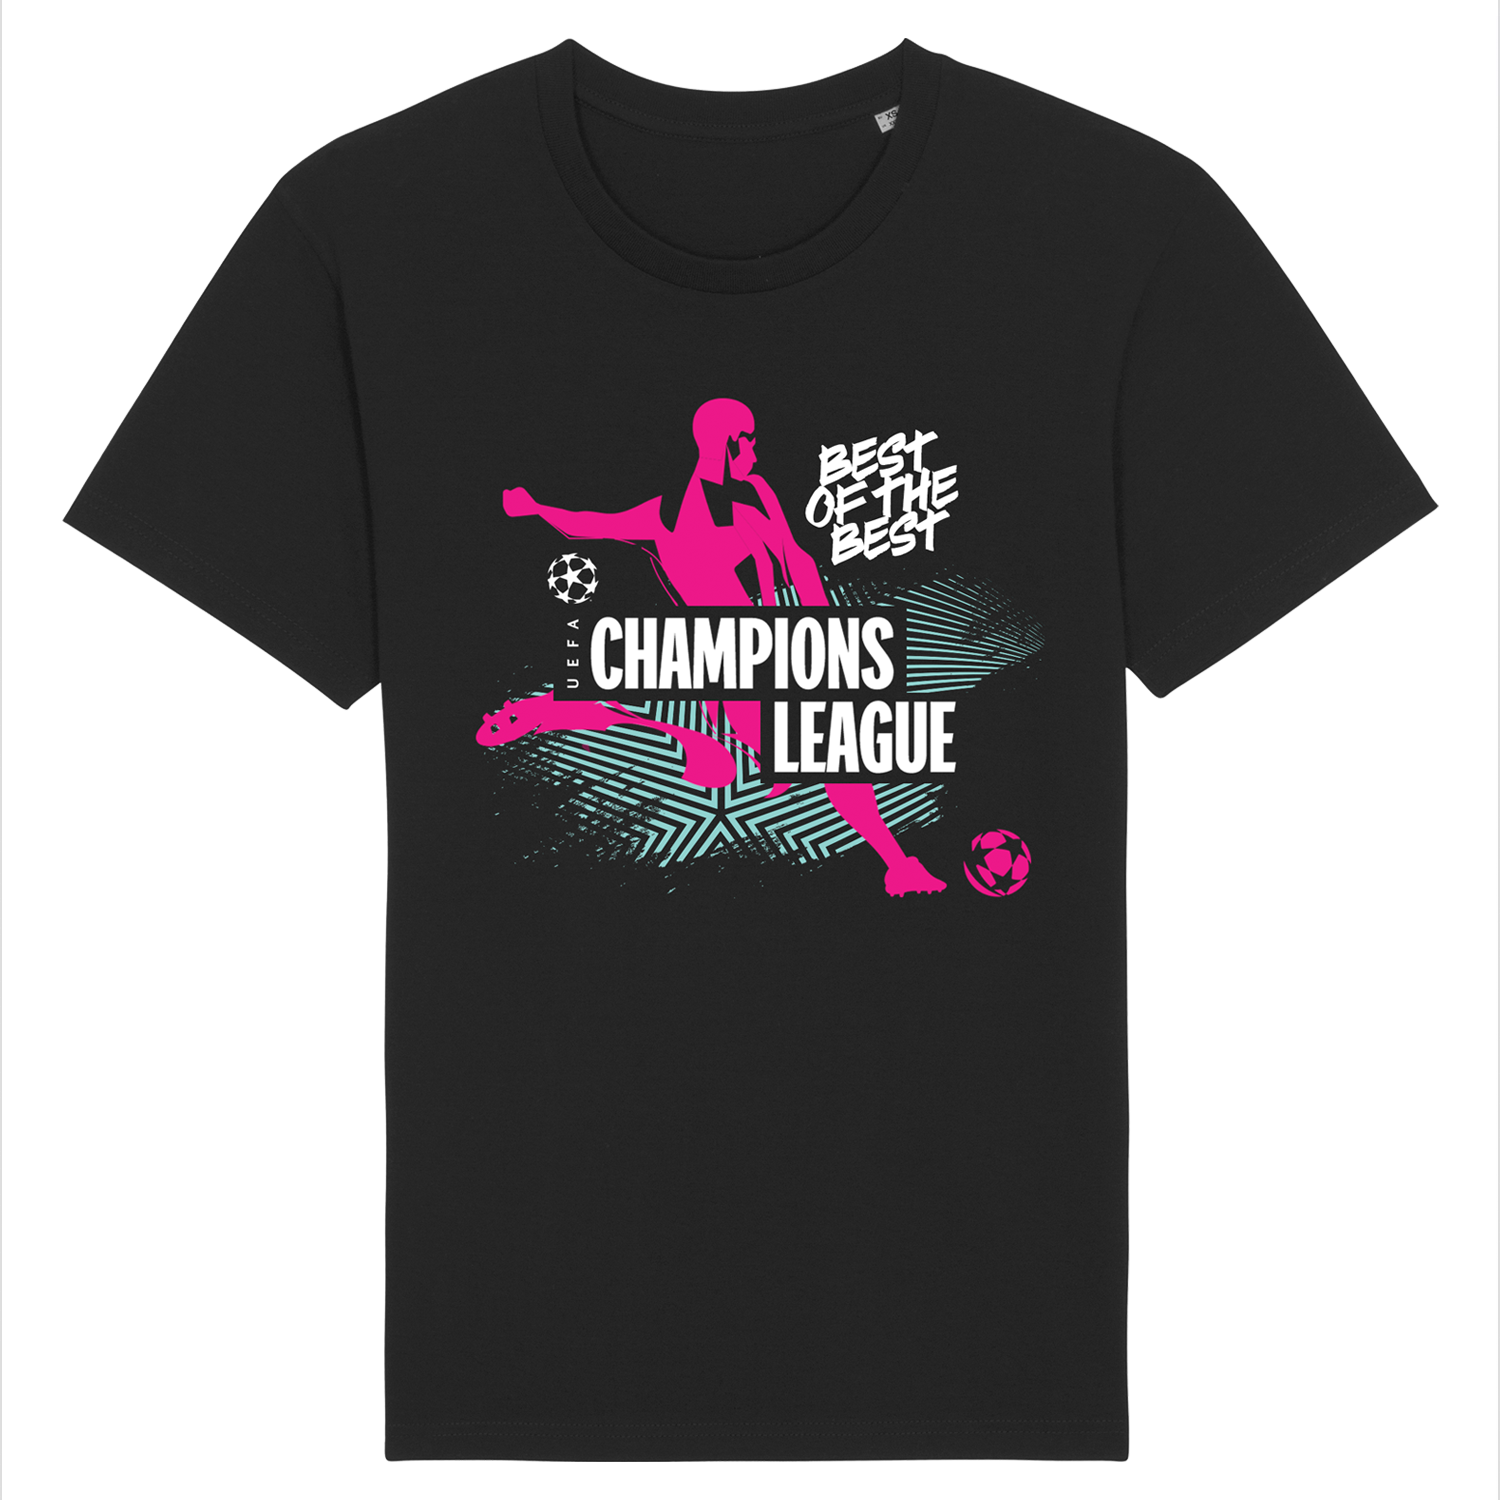 UEFA Champions League - Urban Best Of The Best Black T-Shirt UEFA Club Competitions Online Store